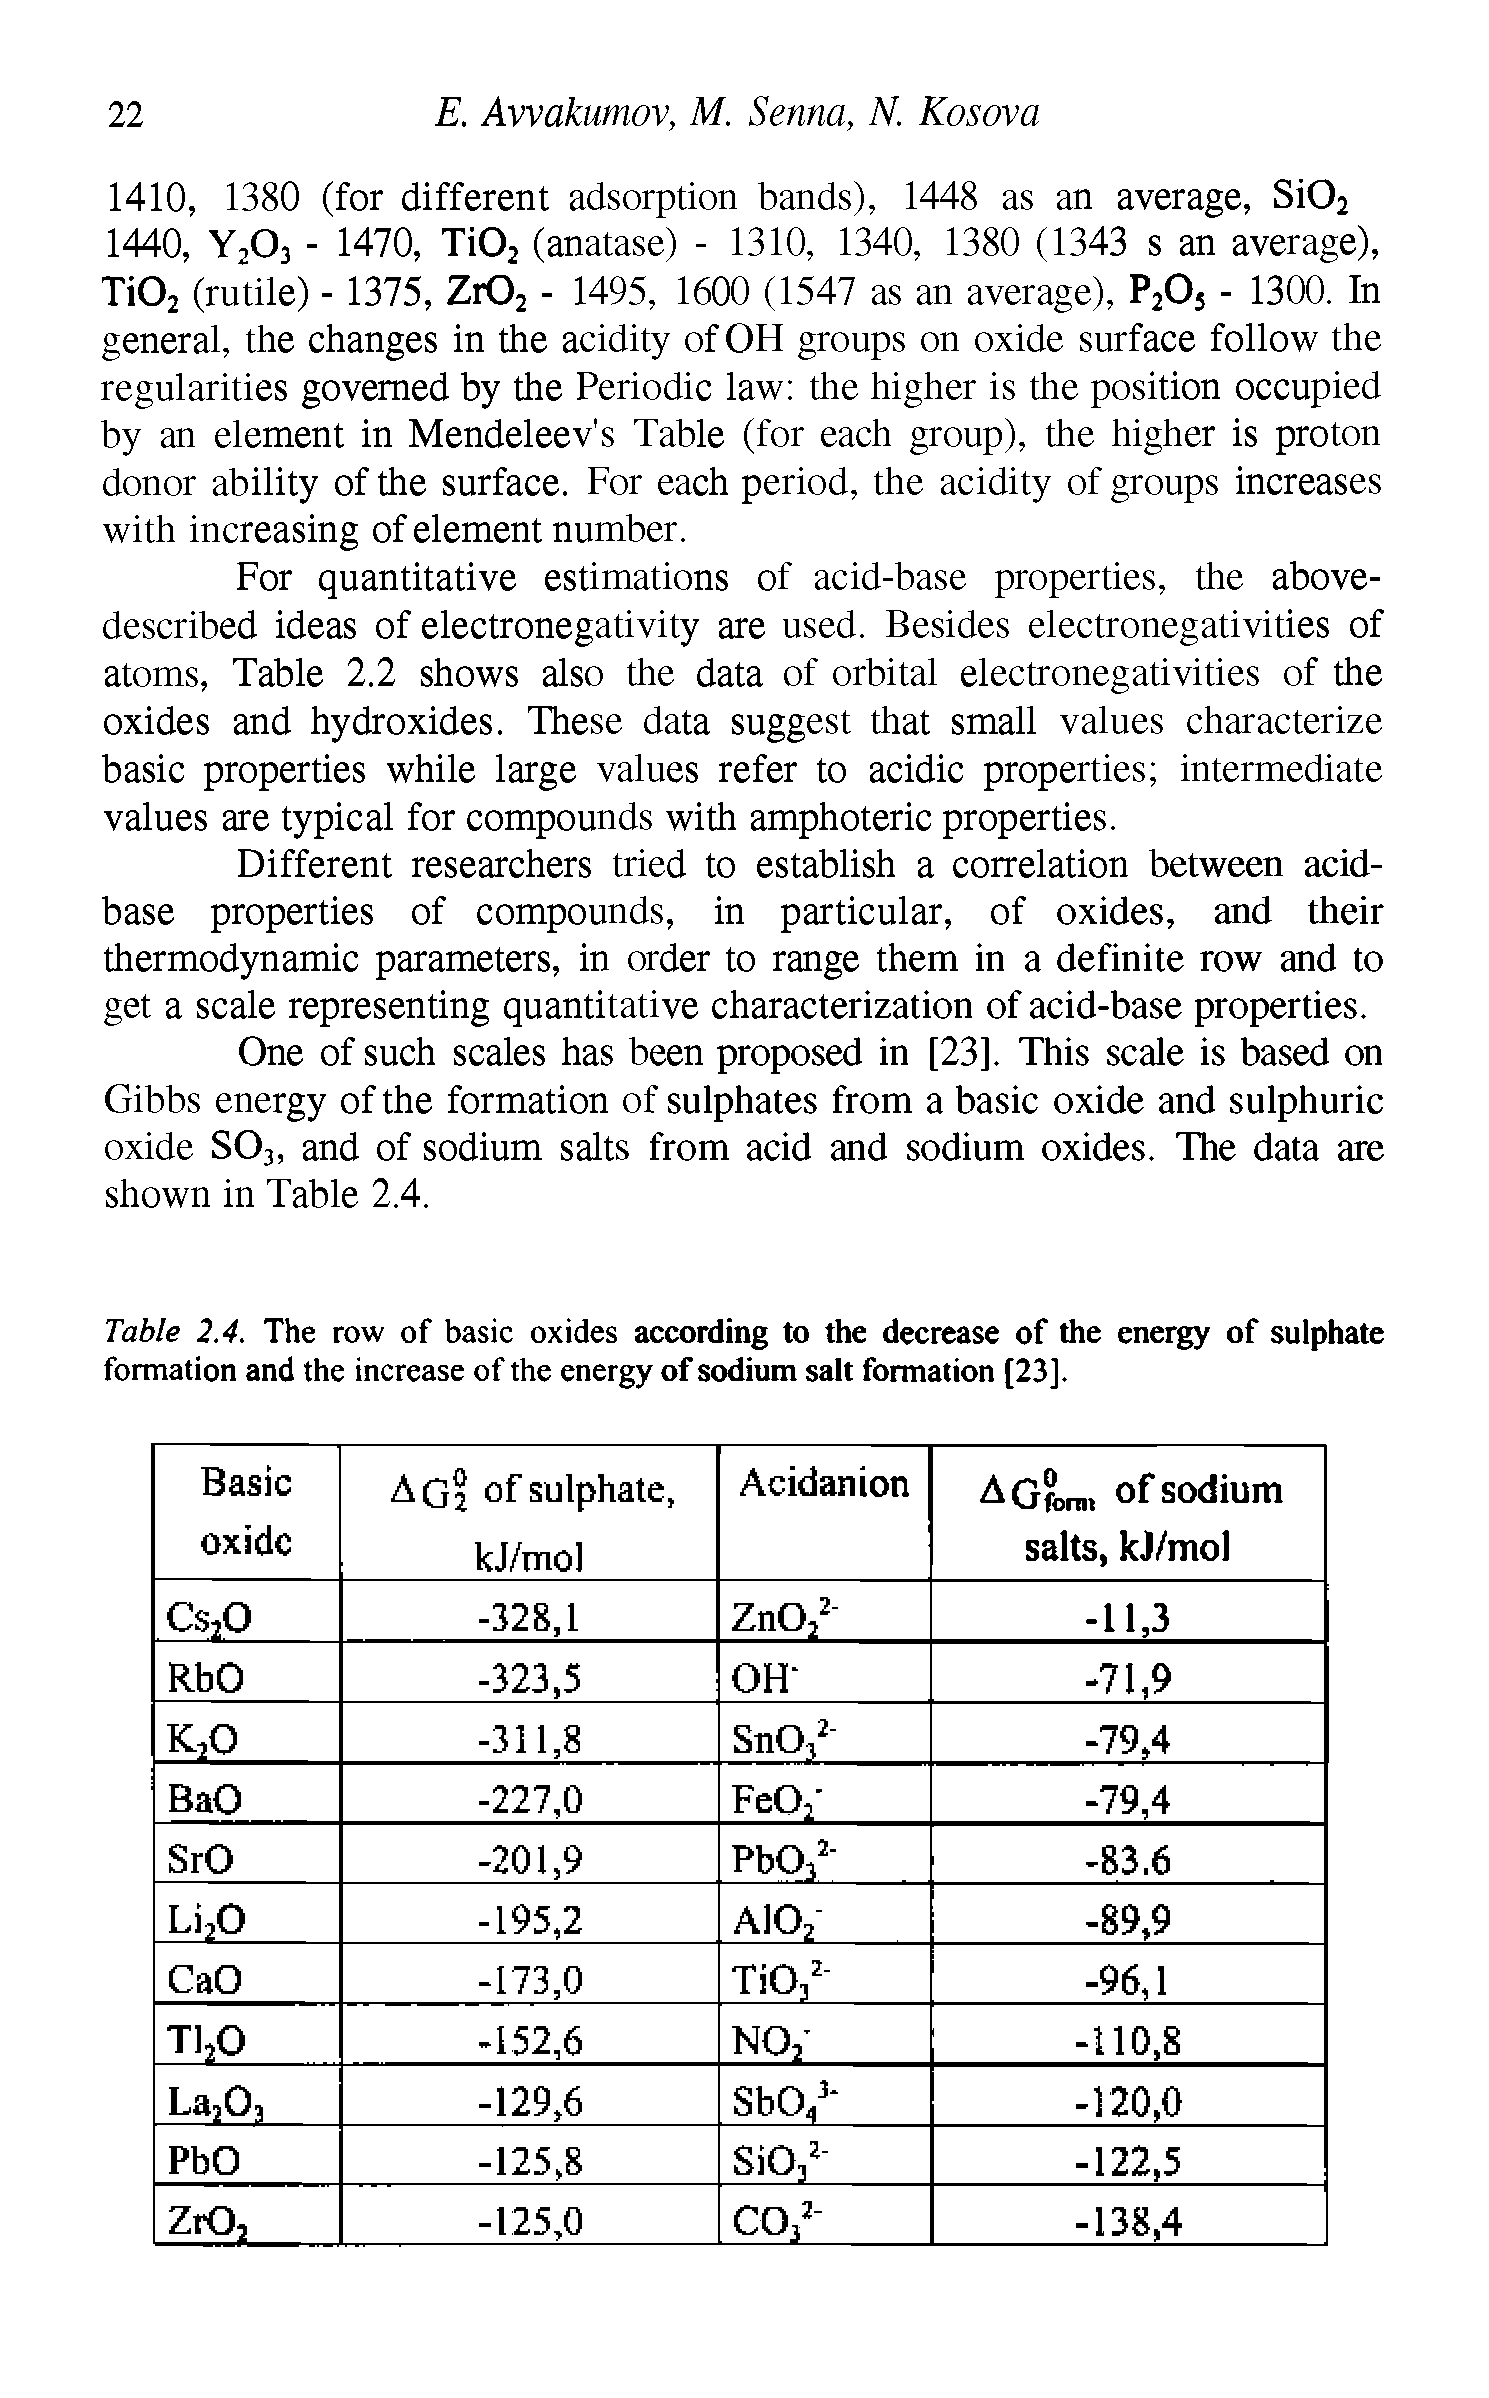 Table 2.4. The row of basic oxides according to the decrease of the energy of sulphate formation and the increase of the energy of sodium salt formation [23].